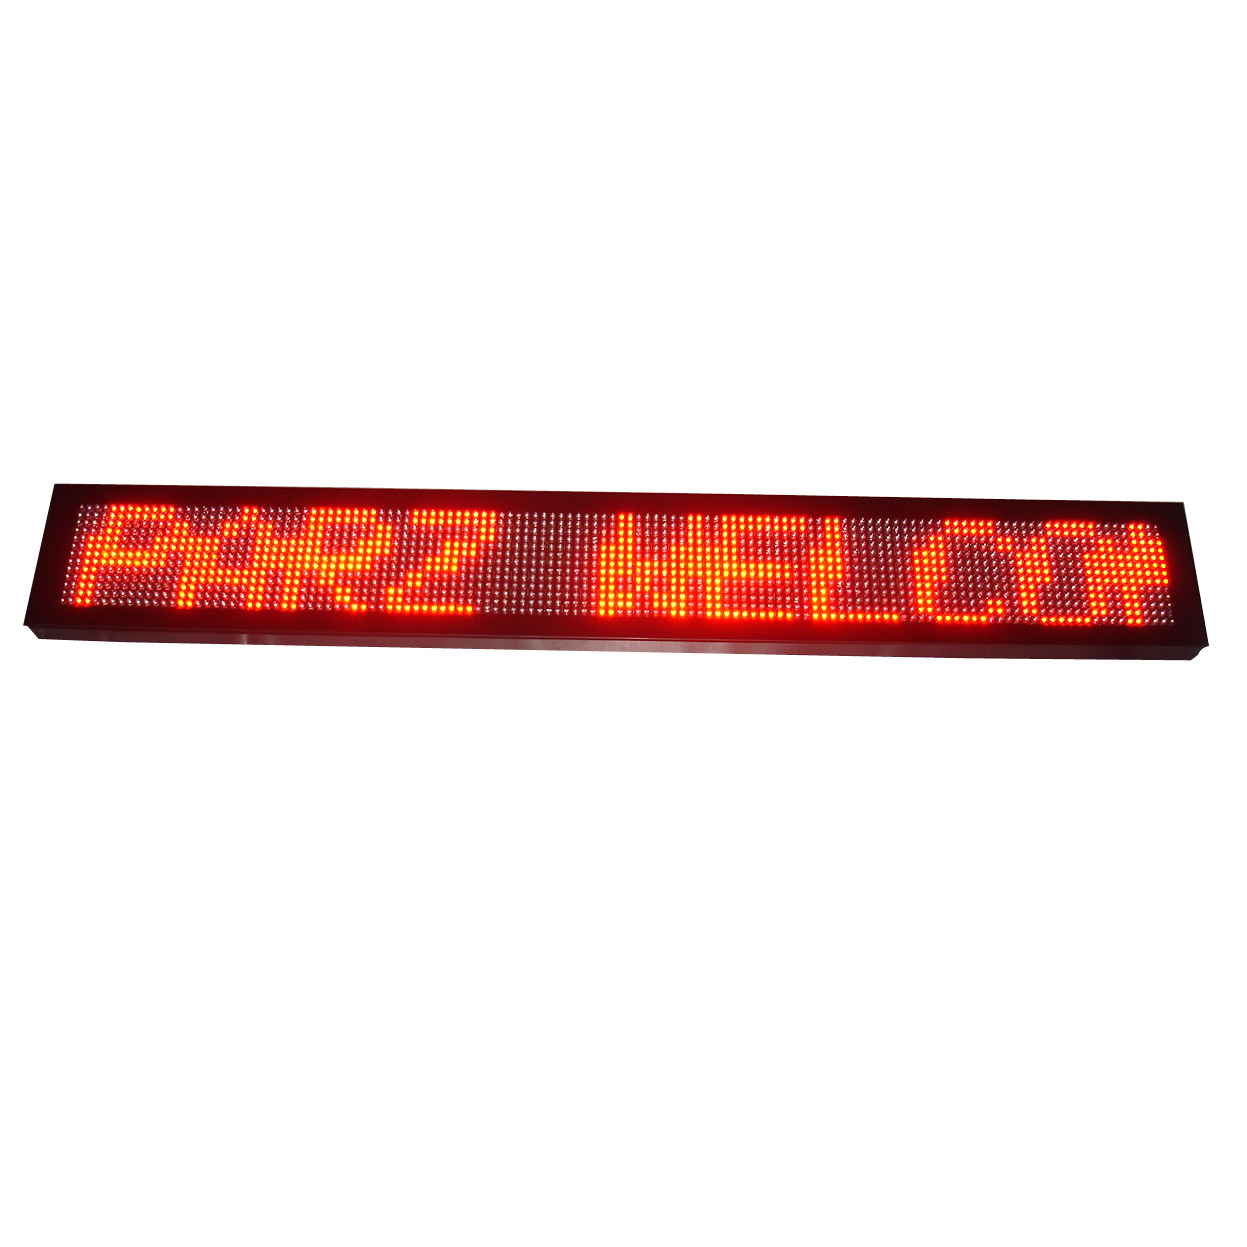 TBD-9100 LED message board